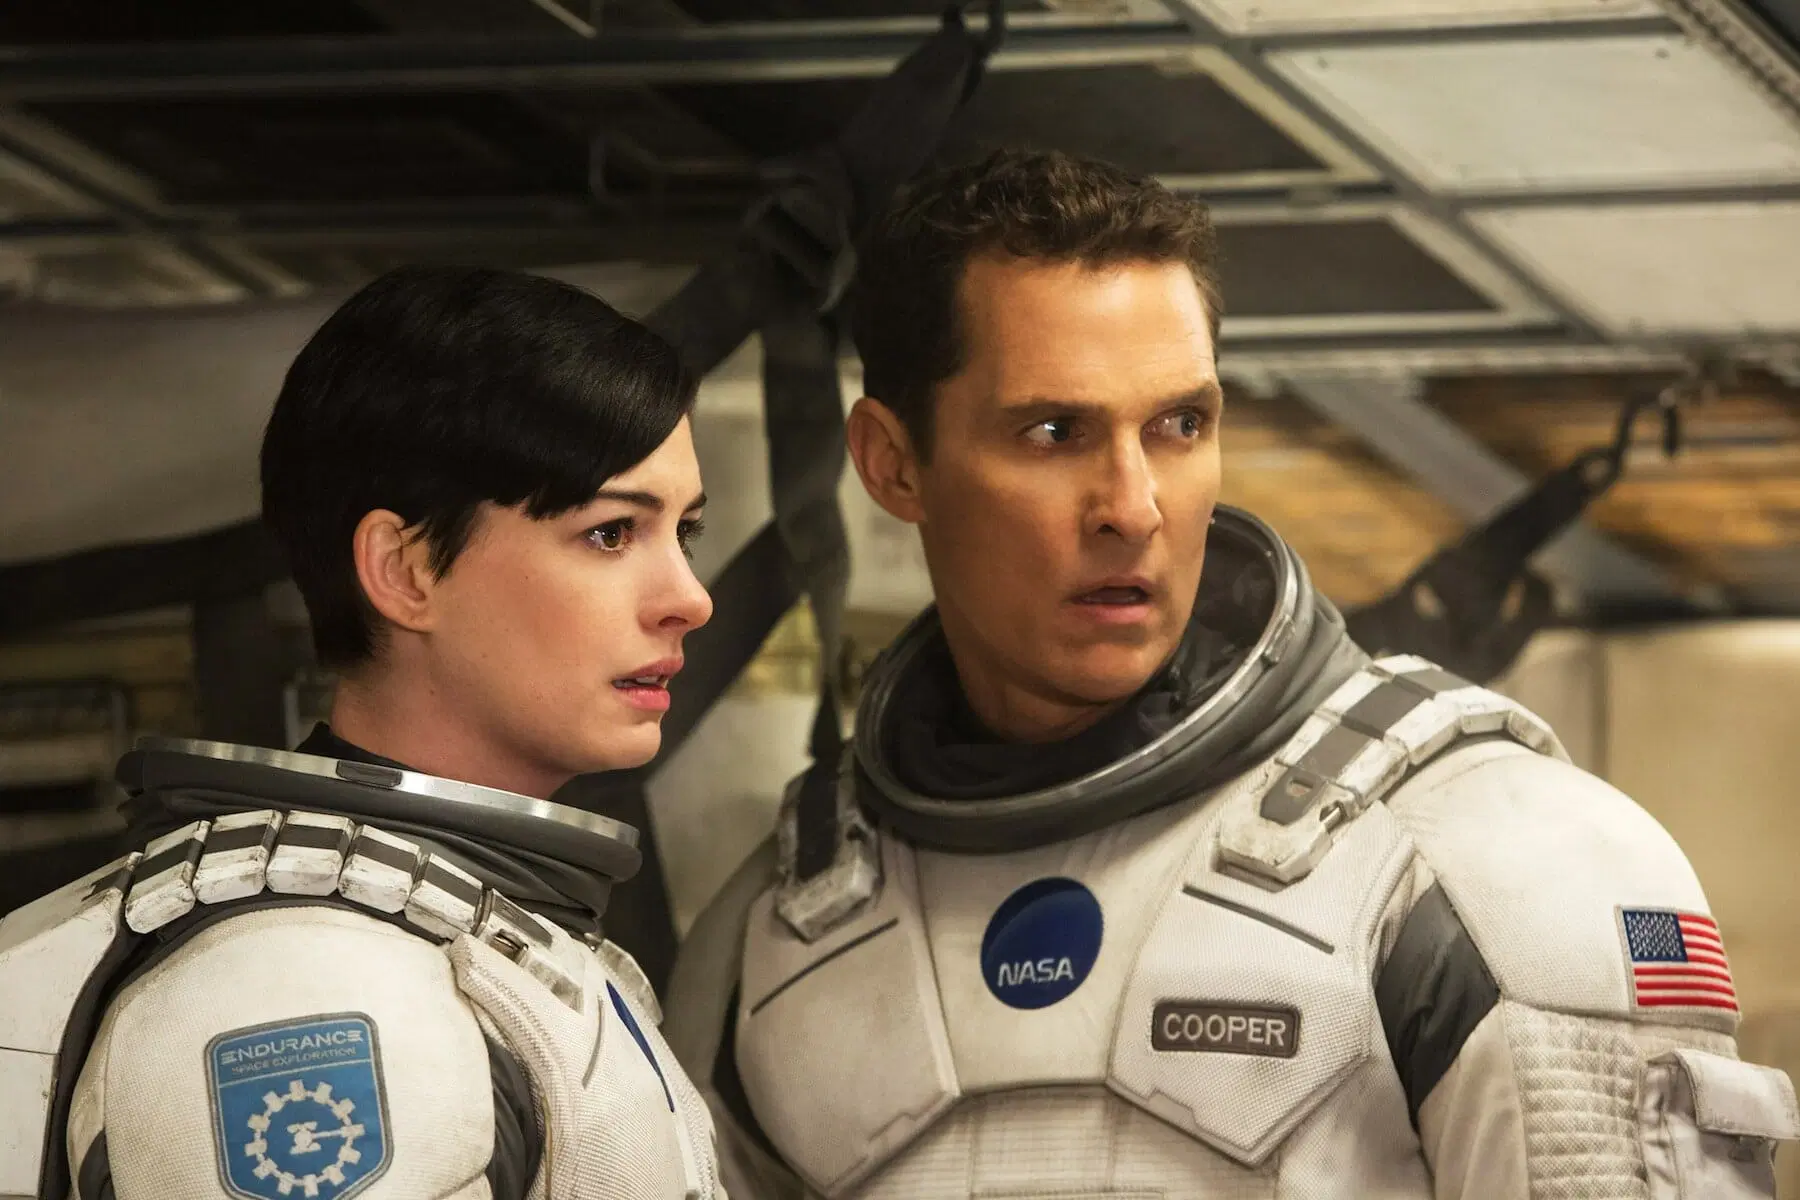 Interstellar 2 Release Date: Can We Expect a Sequel Anytime Soon?